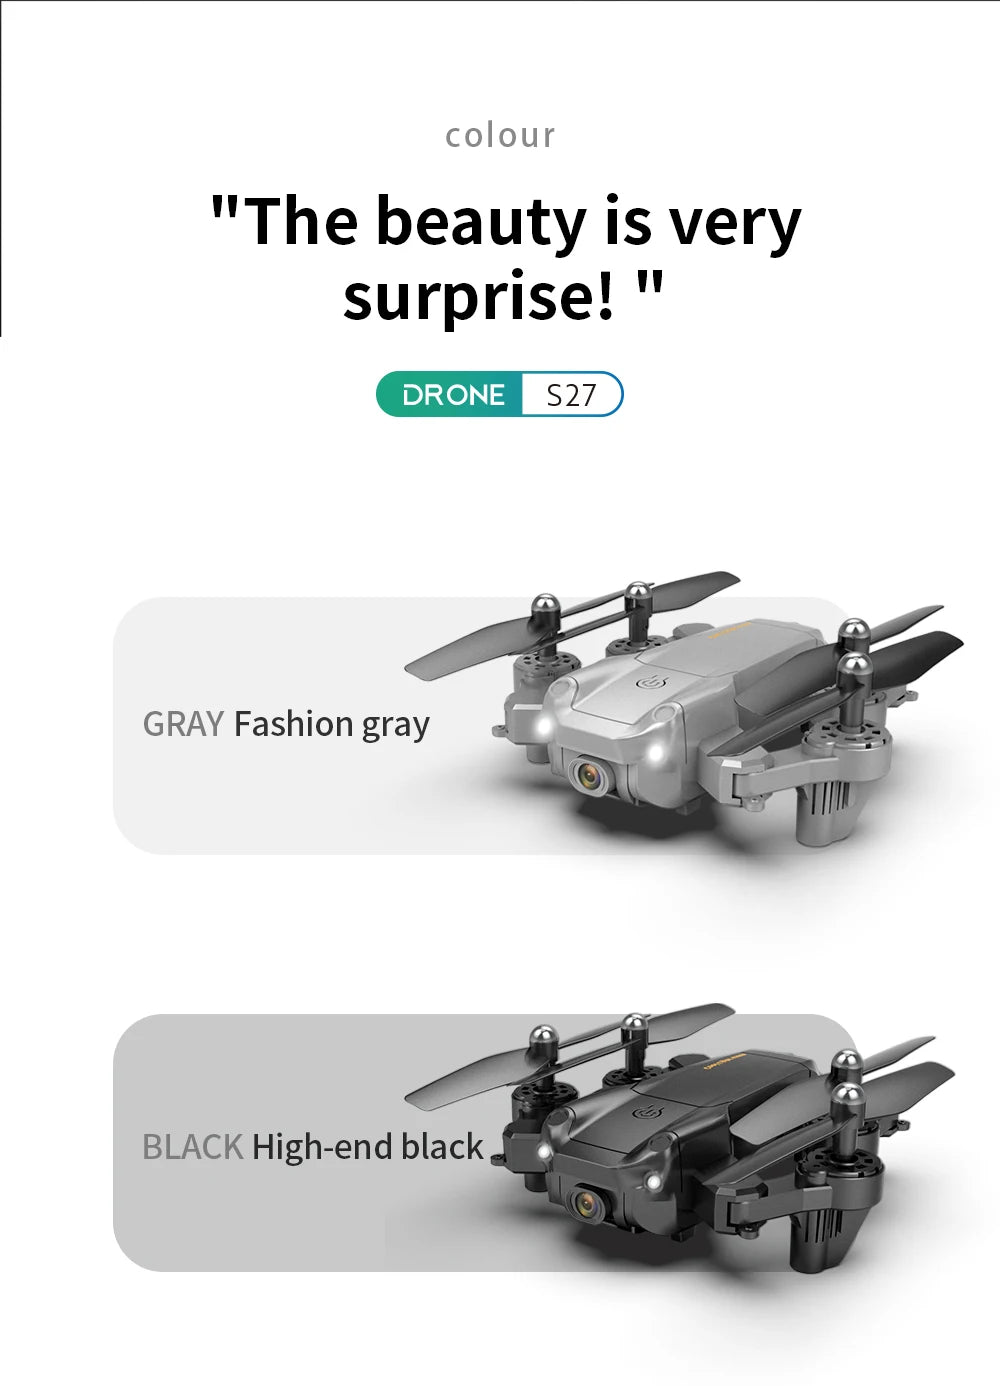 S27 Drone, "the beauty is very surprisel drone s27 gray fashion gray